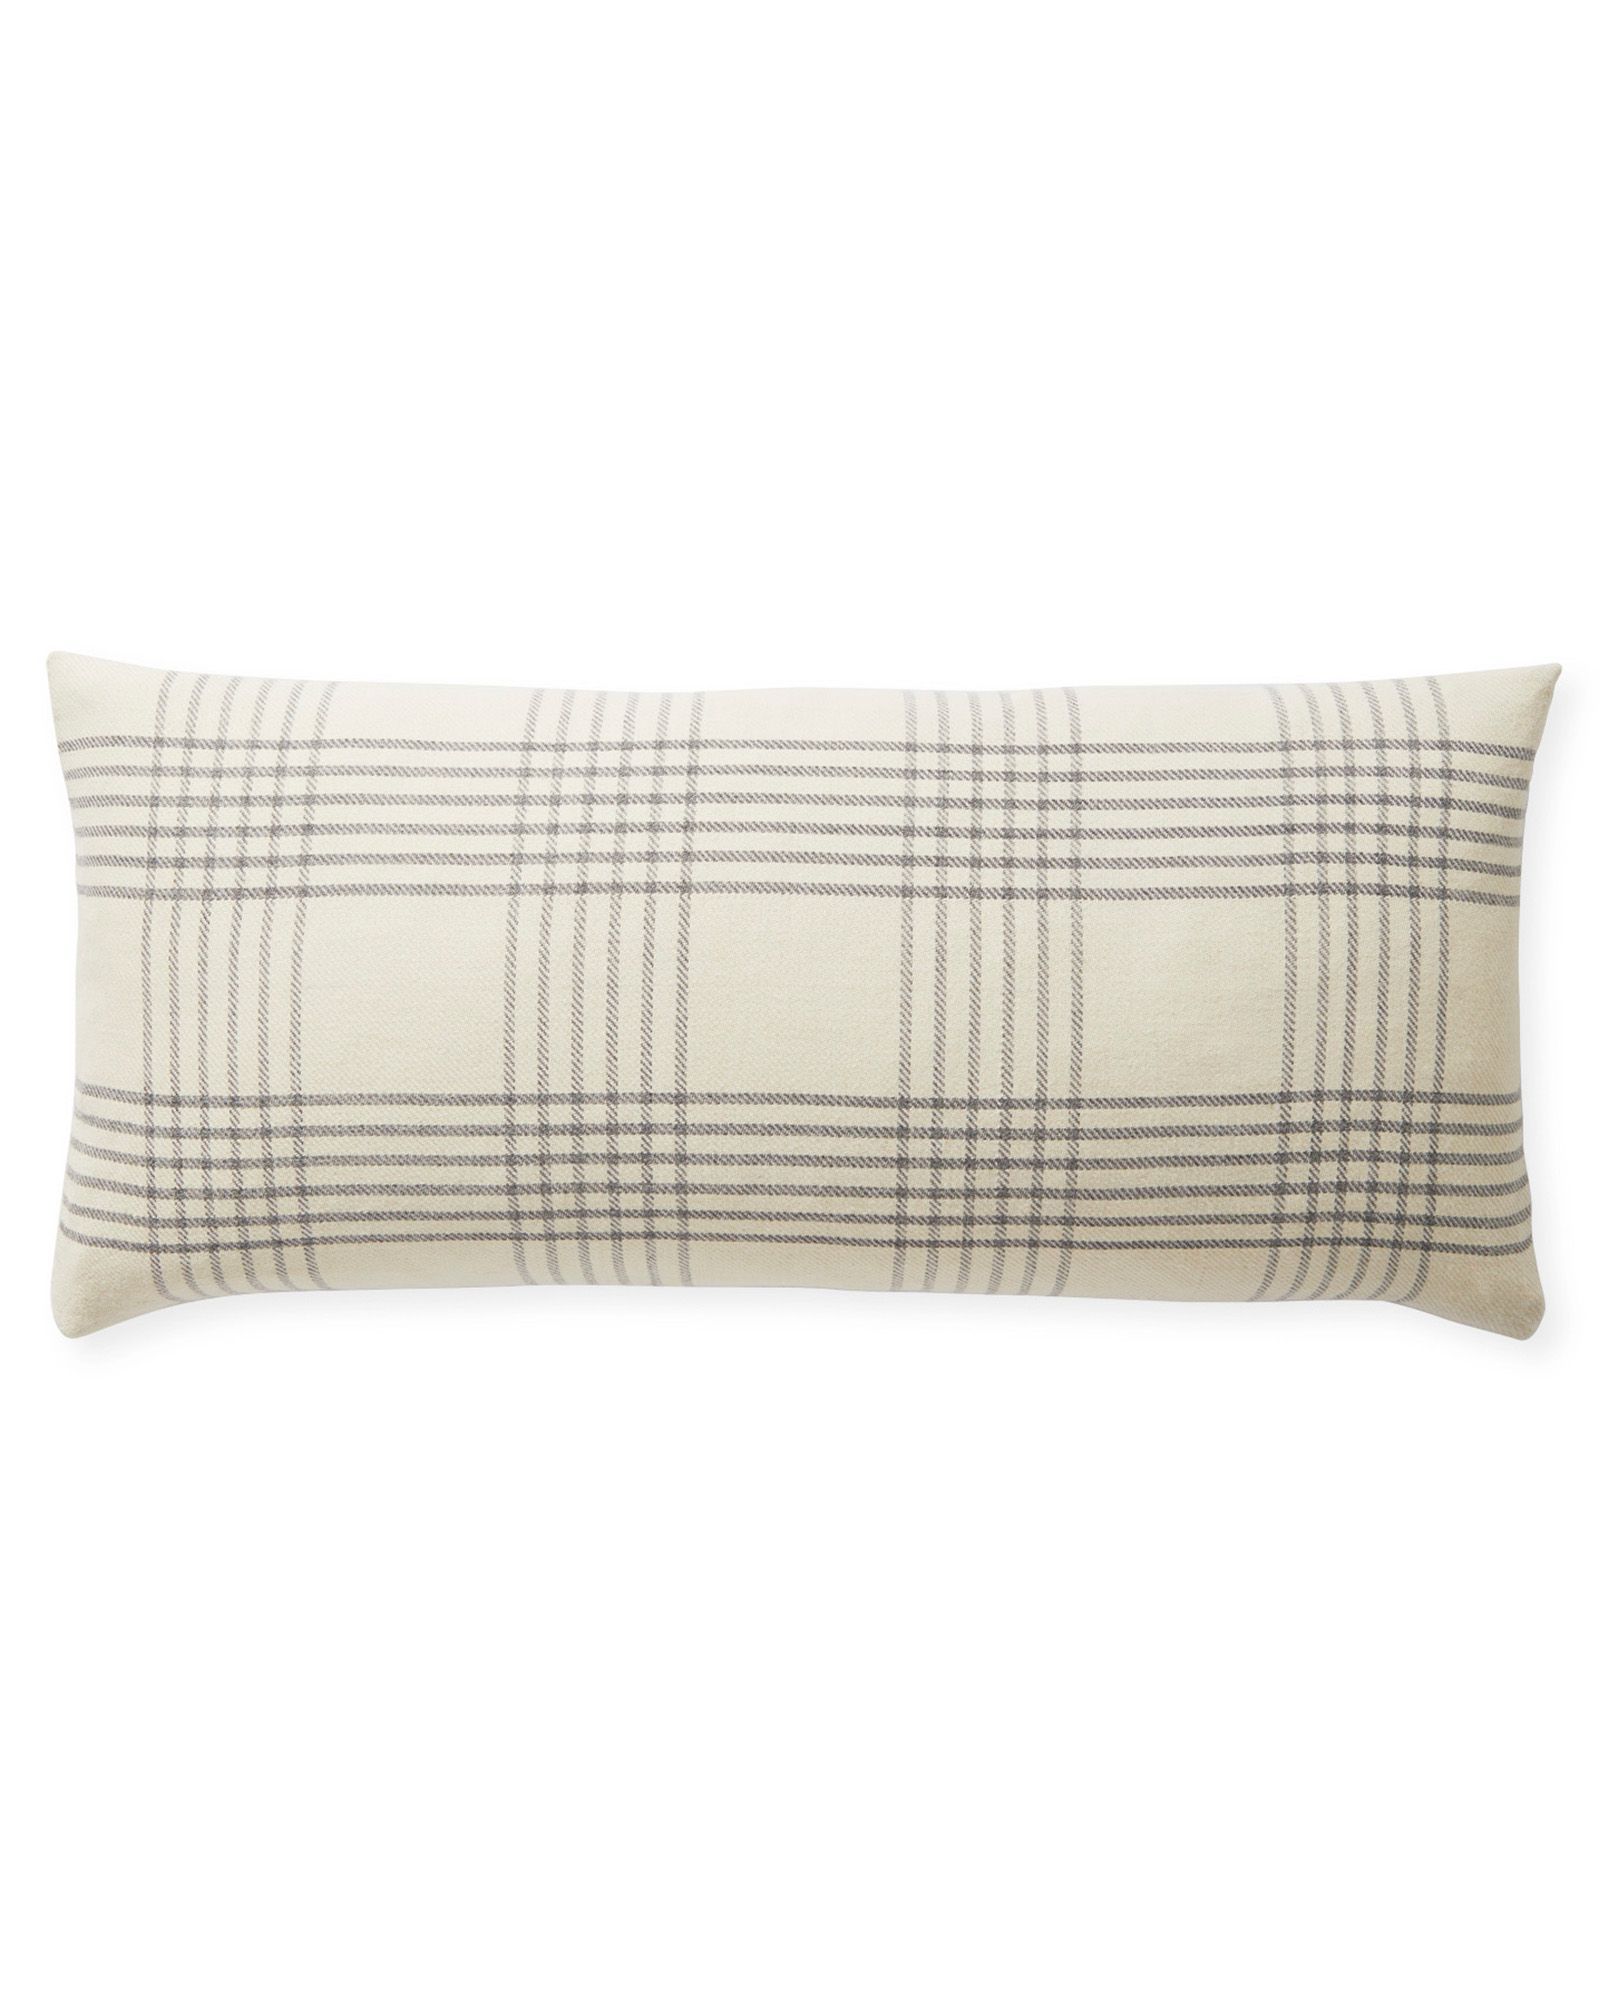 Blakely Plaid Pillow Cover